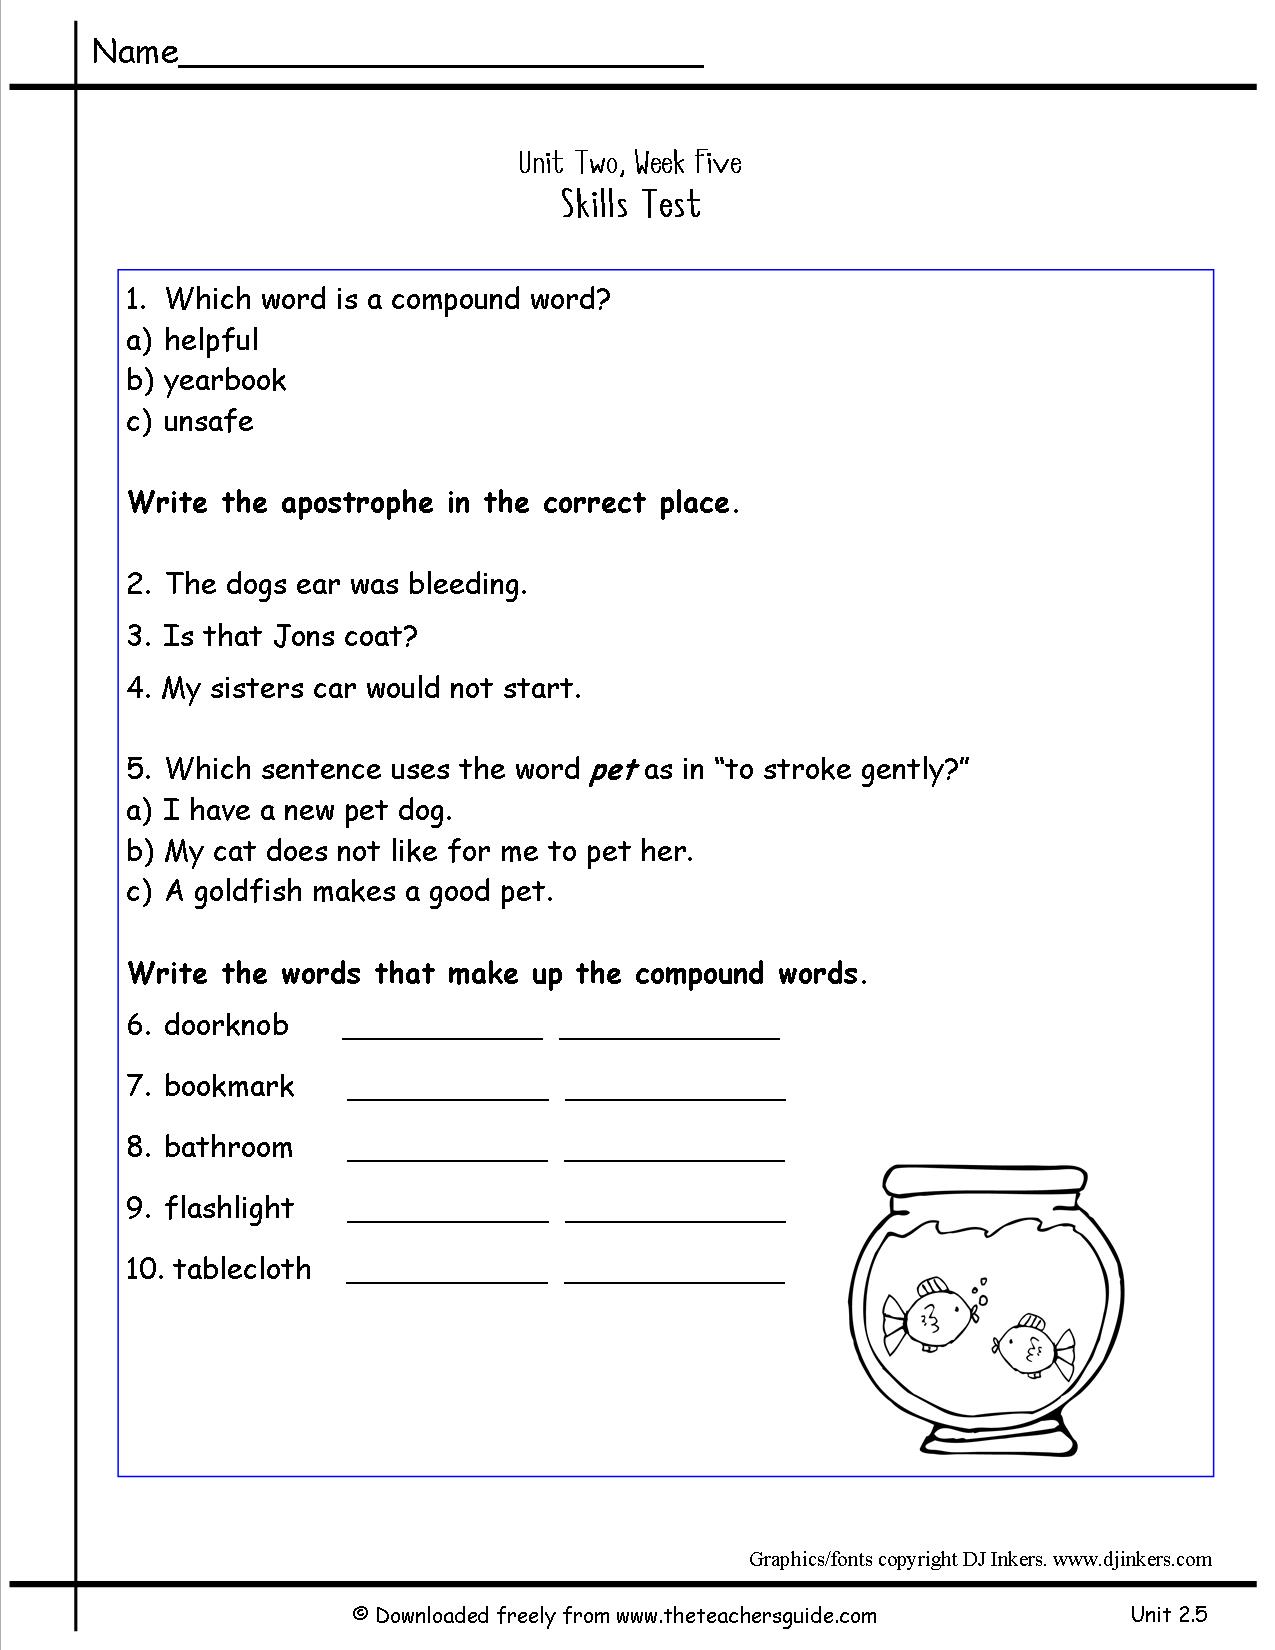 6-best-images-of-preschool-printable-worksheets-compound-word-cut-out